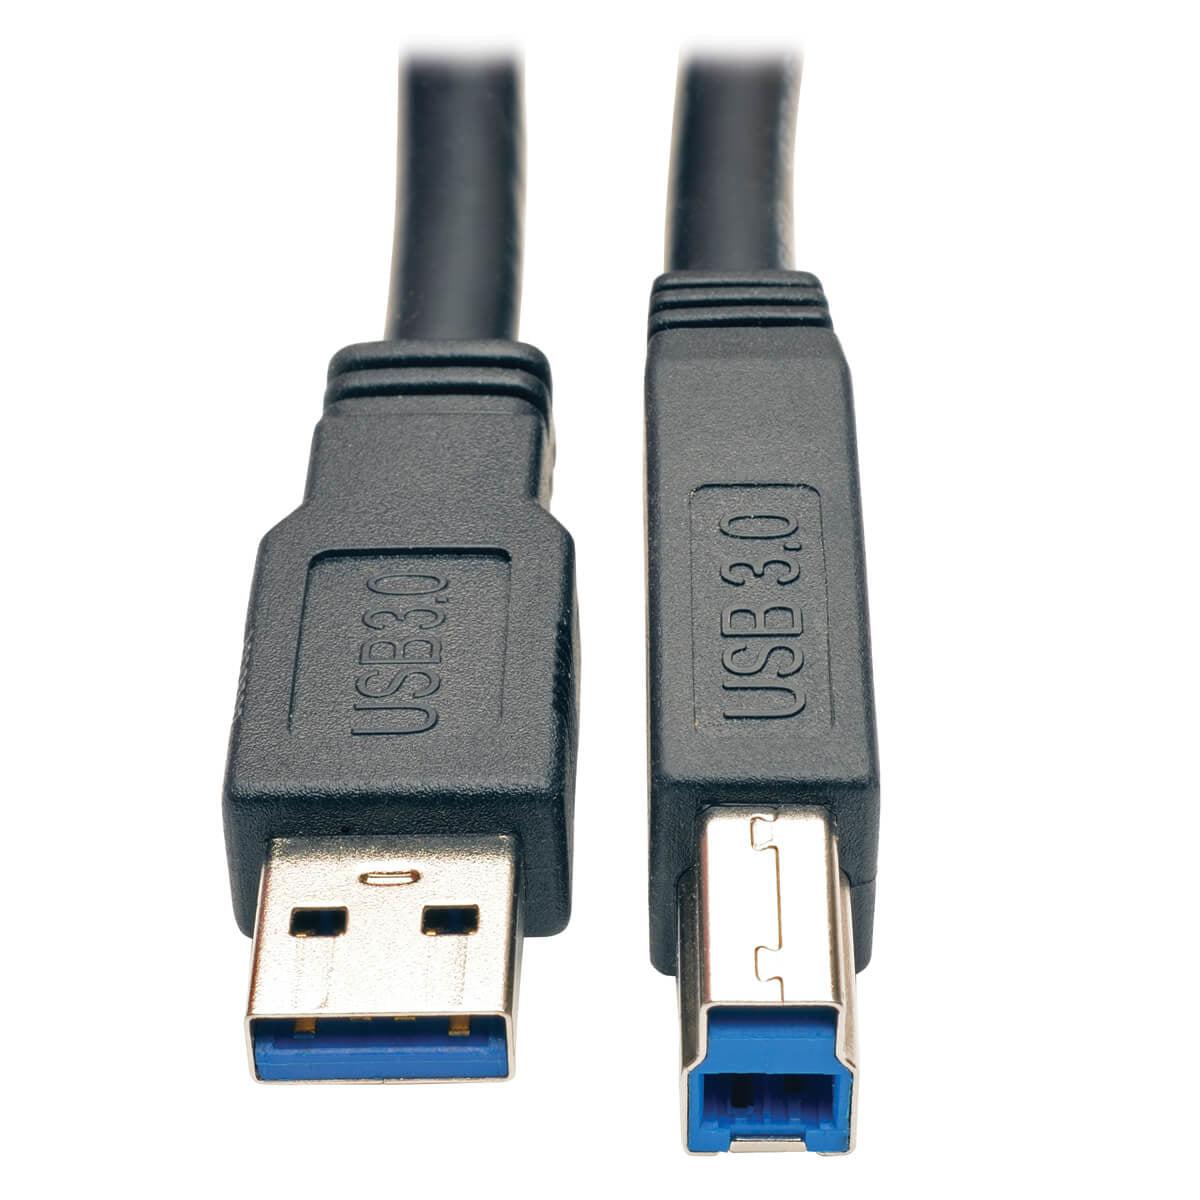 Tripp Lite U328-025 Usb 3.0 Superspeed Active Repeater Cable (Ab M/M), 25 Ft. (7.62 M)